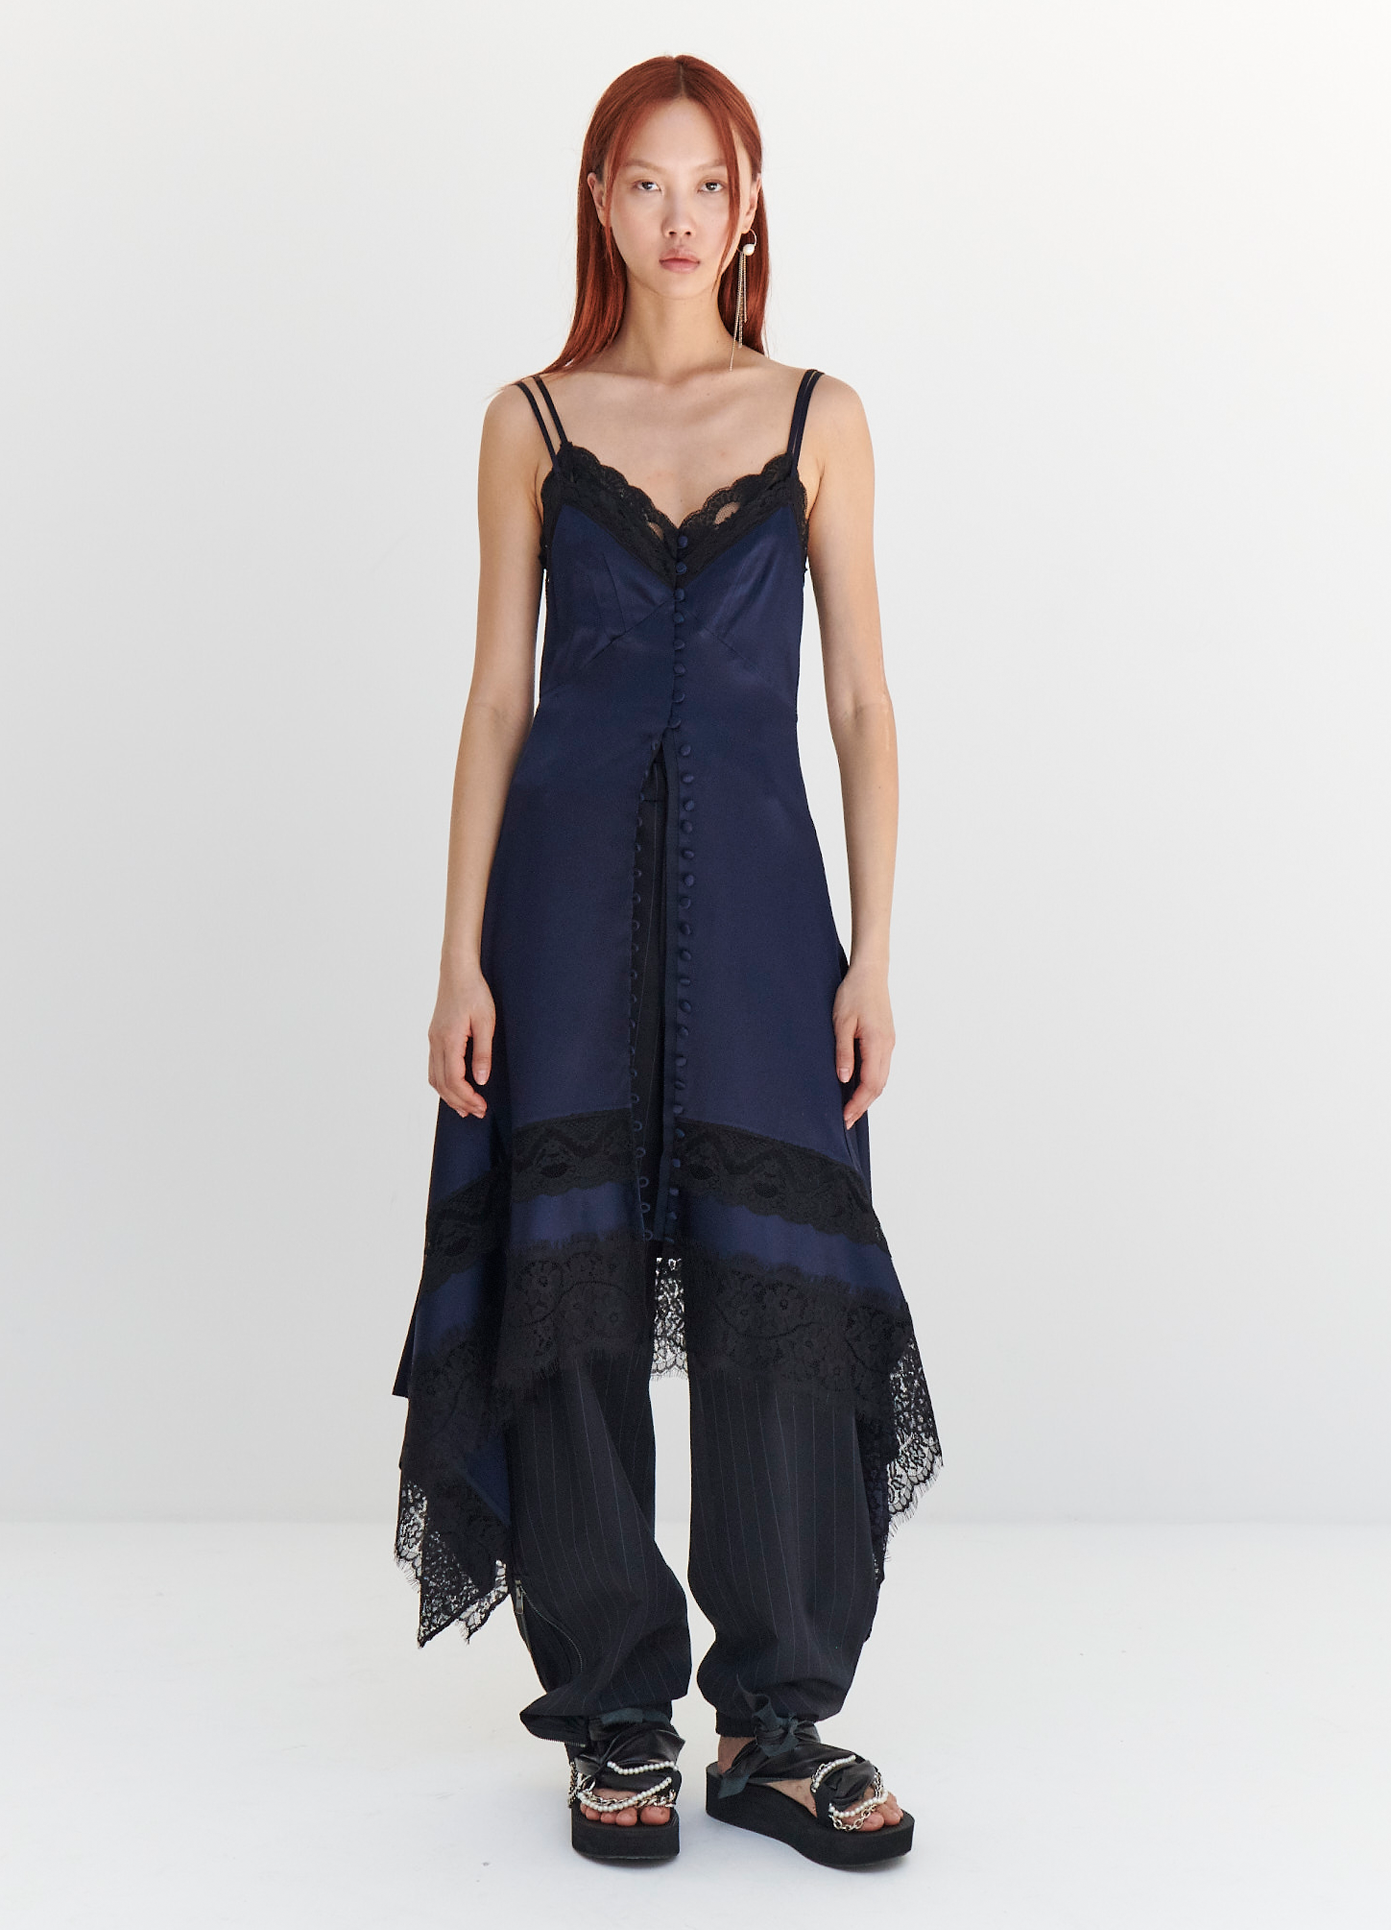 MONSE Lace Trim Slip Dress in Midnight on model full front view